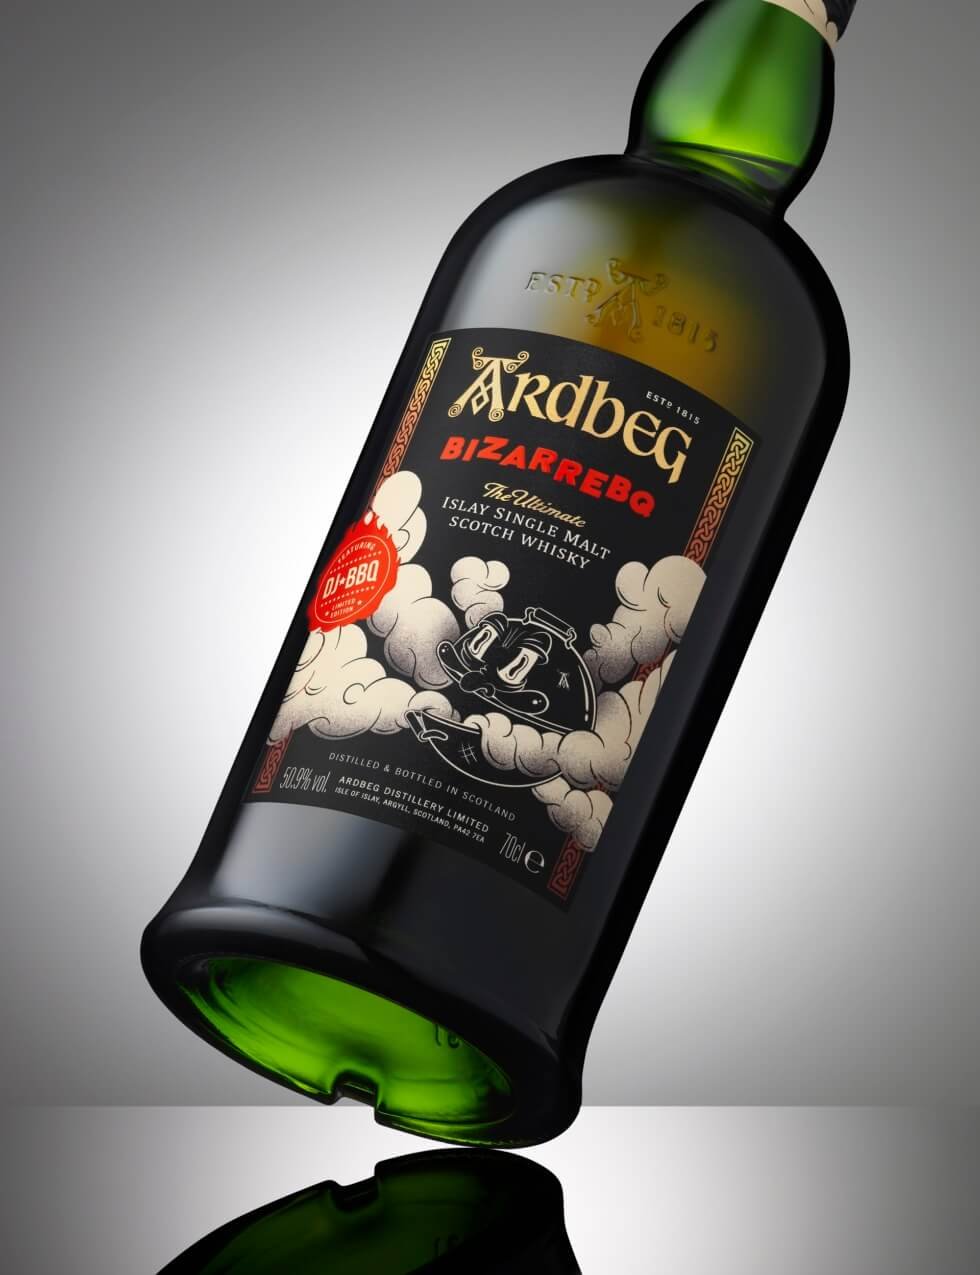 Ardberg's BizzareBQ Is A Single Malt Scotch Curated For Summer Cookouts